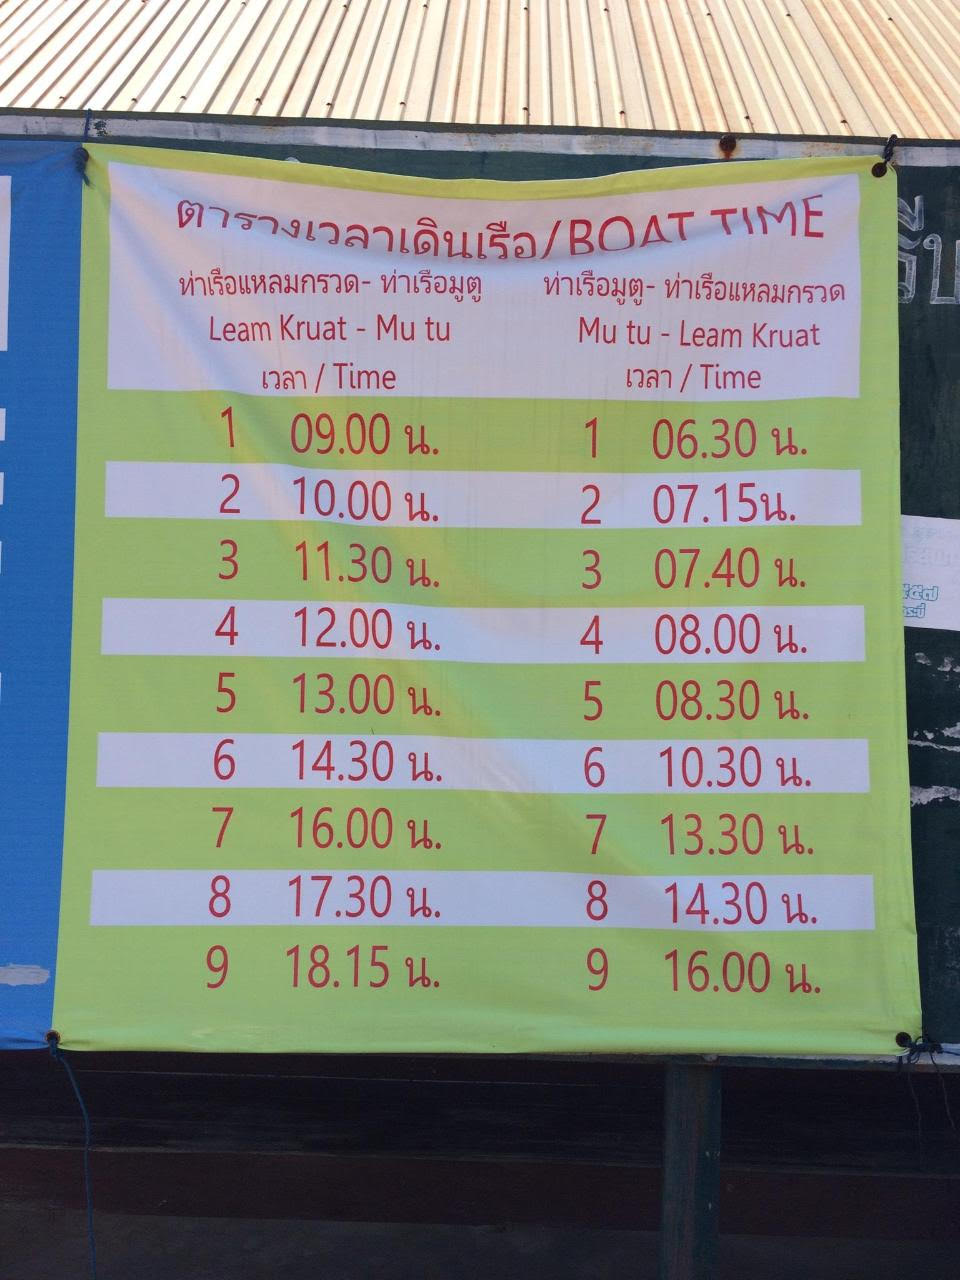 Boat timetable to Koh Jum.